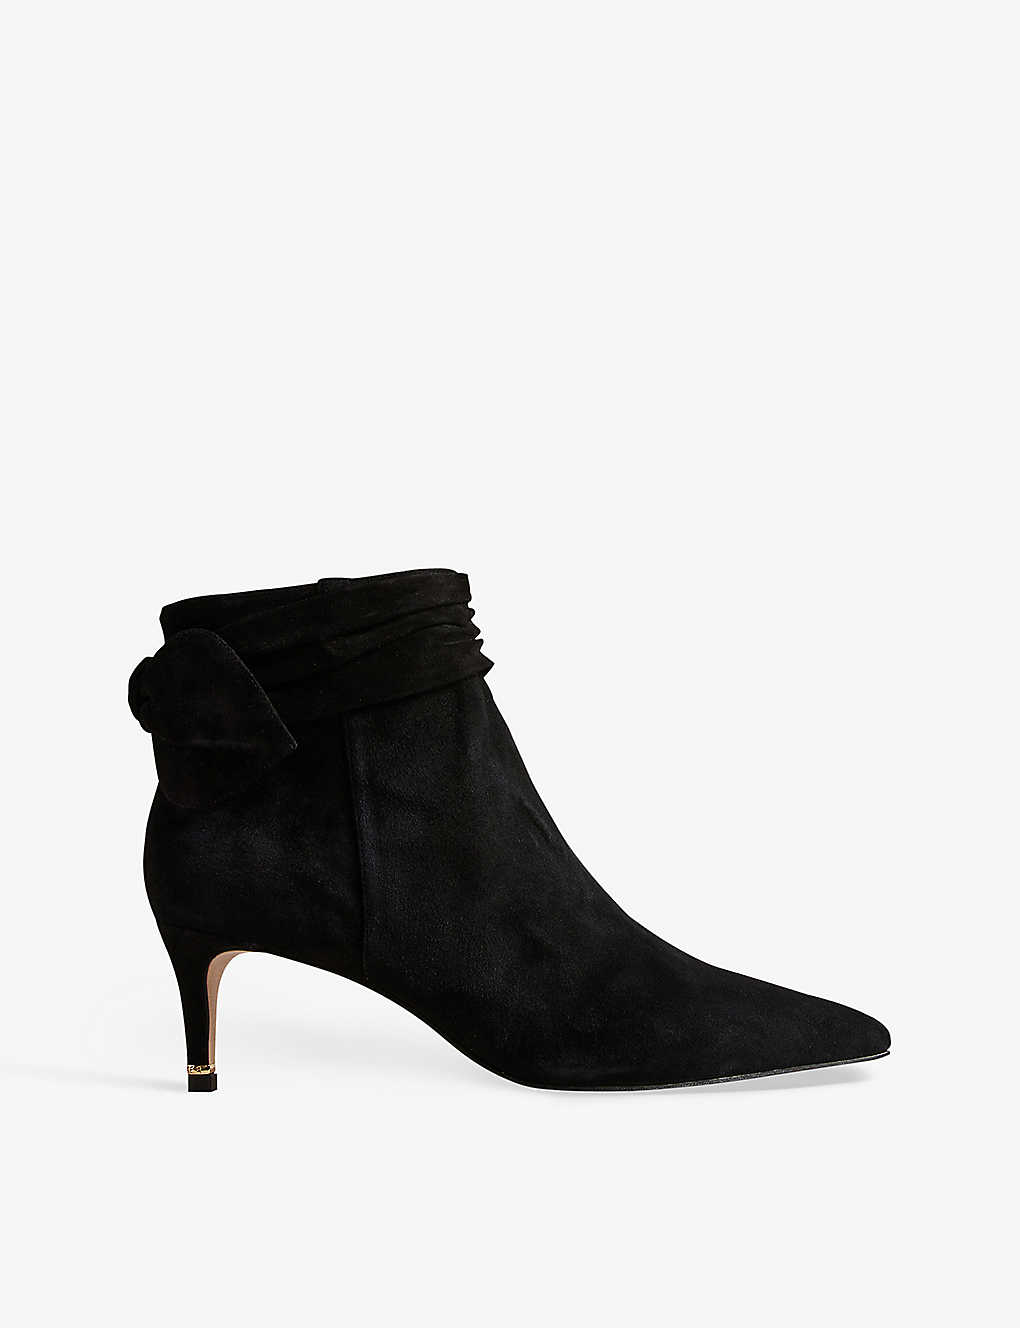 TED BAKER TED BAKER WOMEN'S BLACK YONA BOW-EMBELLISHED HEELED SUEDE-LEATHER ANKLE BOOTS